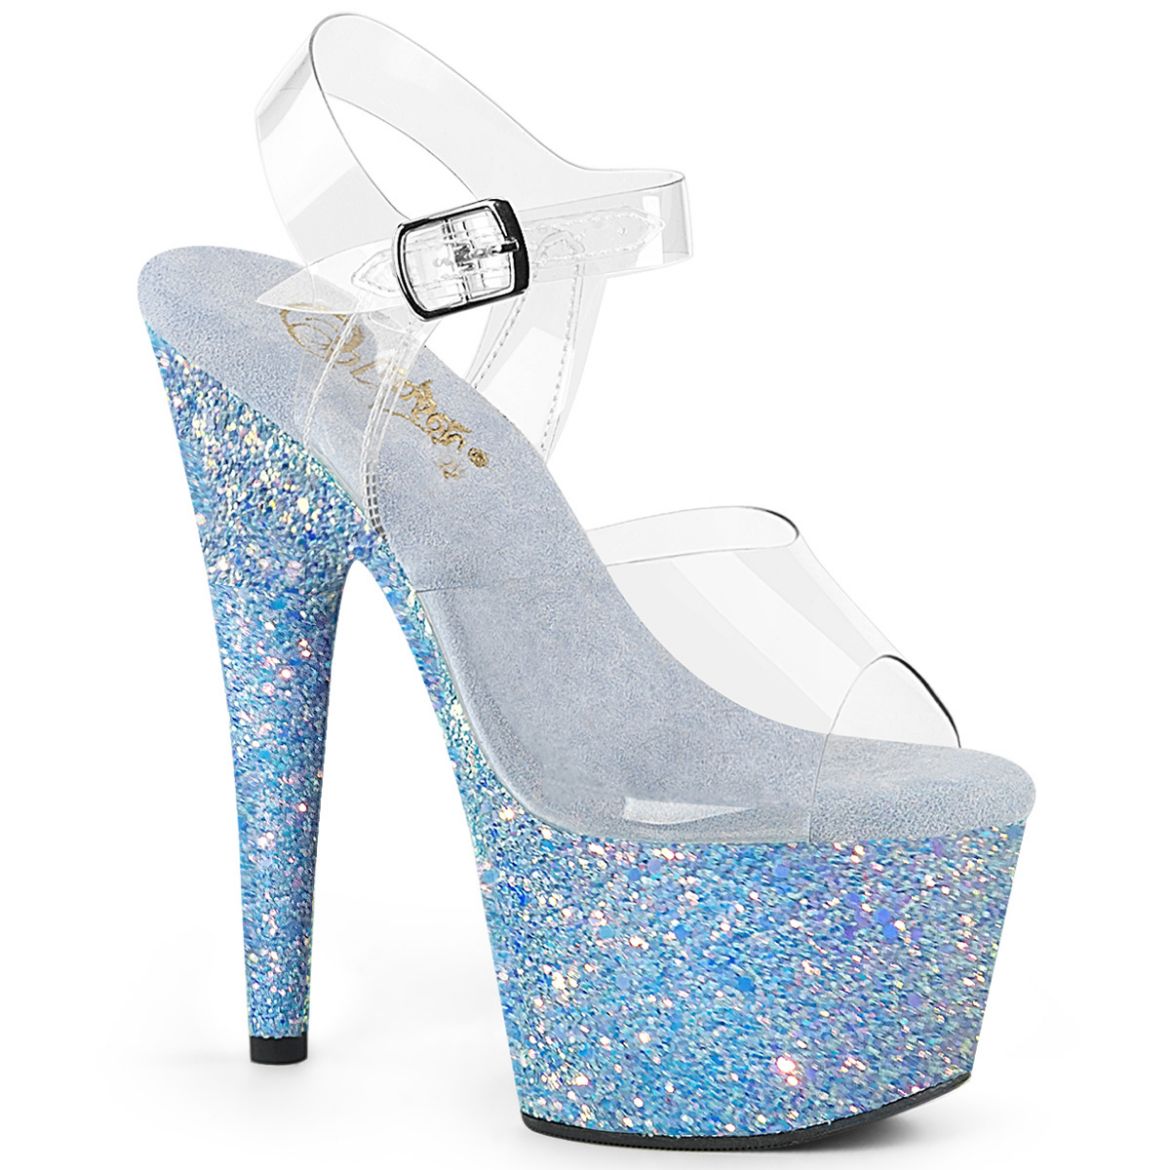 Product image of Pleaser ADORE-708LG Clr/B. Blue Glitter 7 Inch Heel 2 3/4 Inch PF Ankle Strap Sandal w/ Holo Glitter Bottom